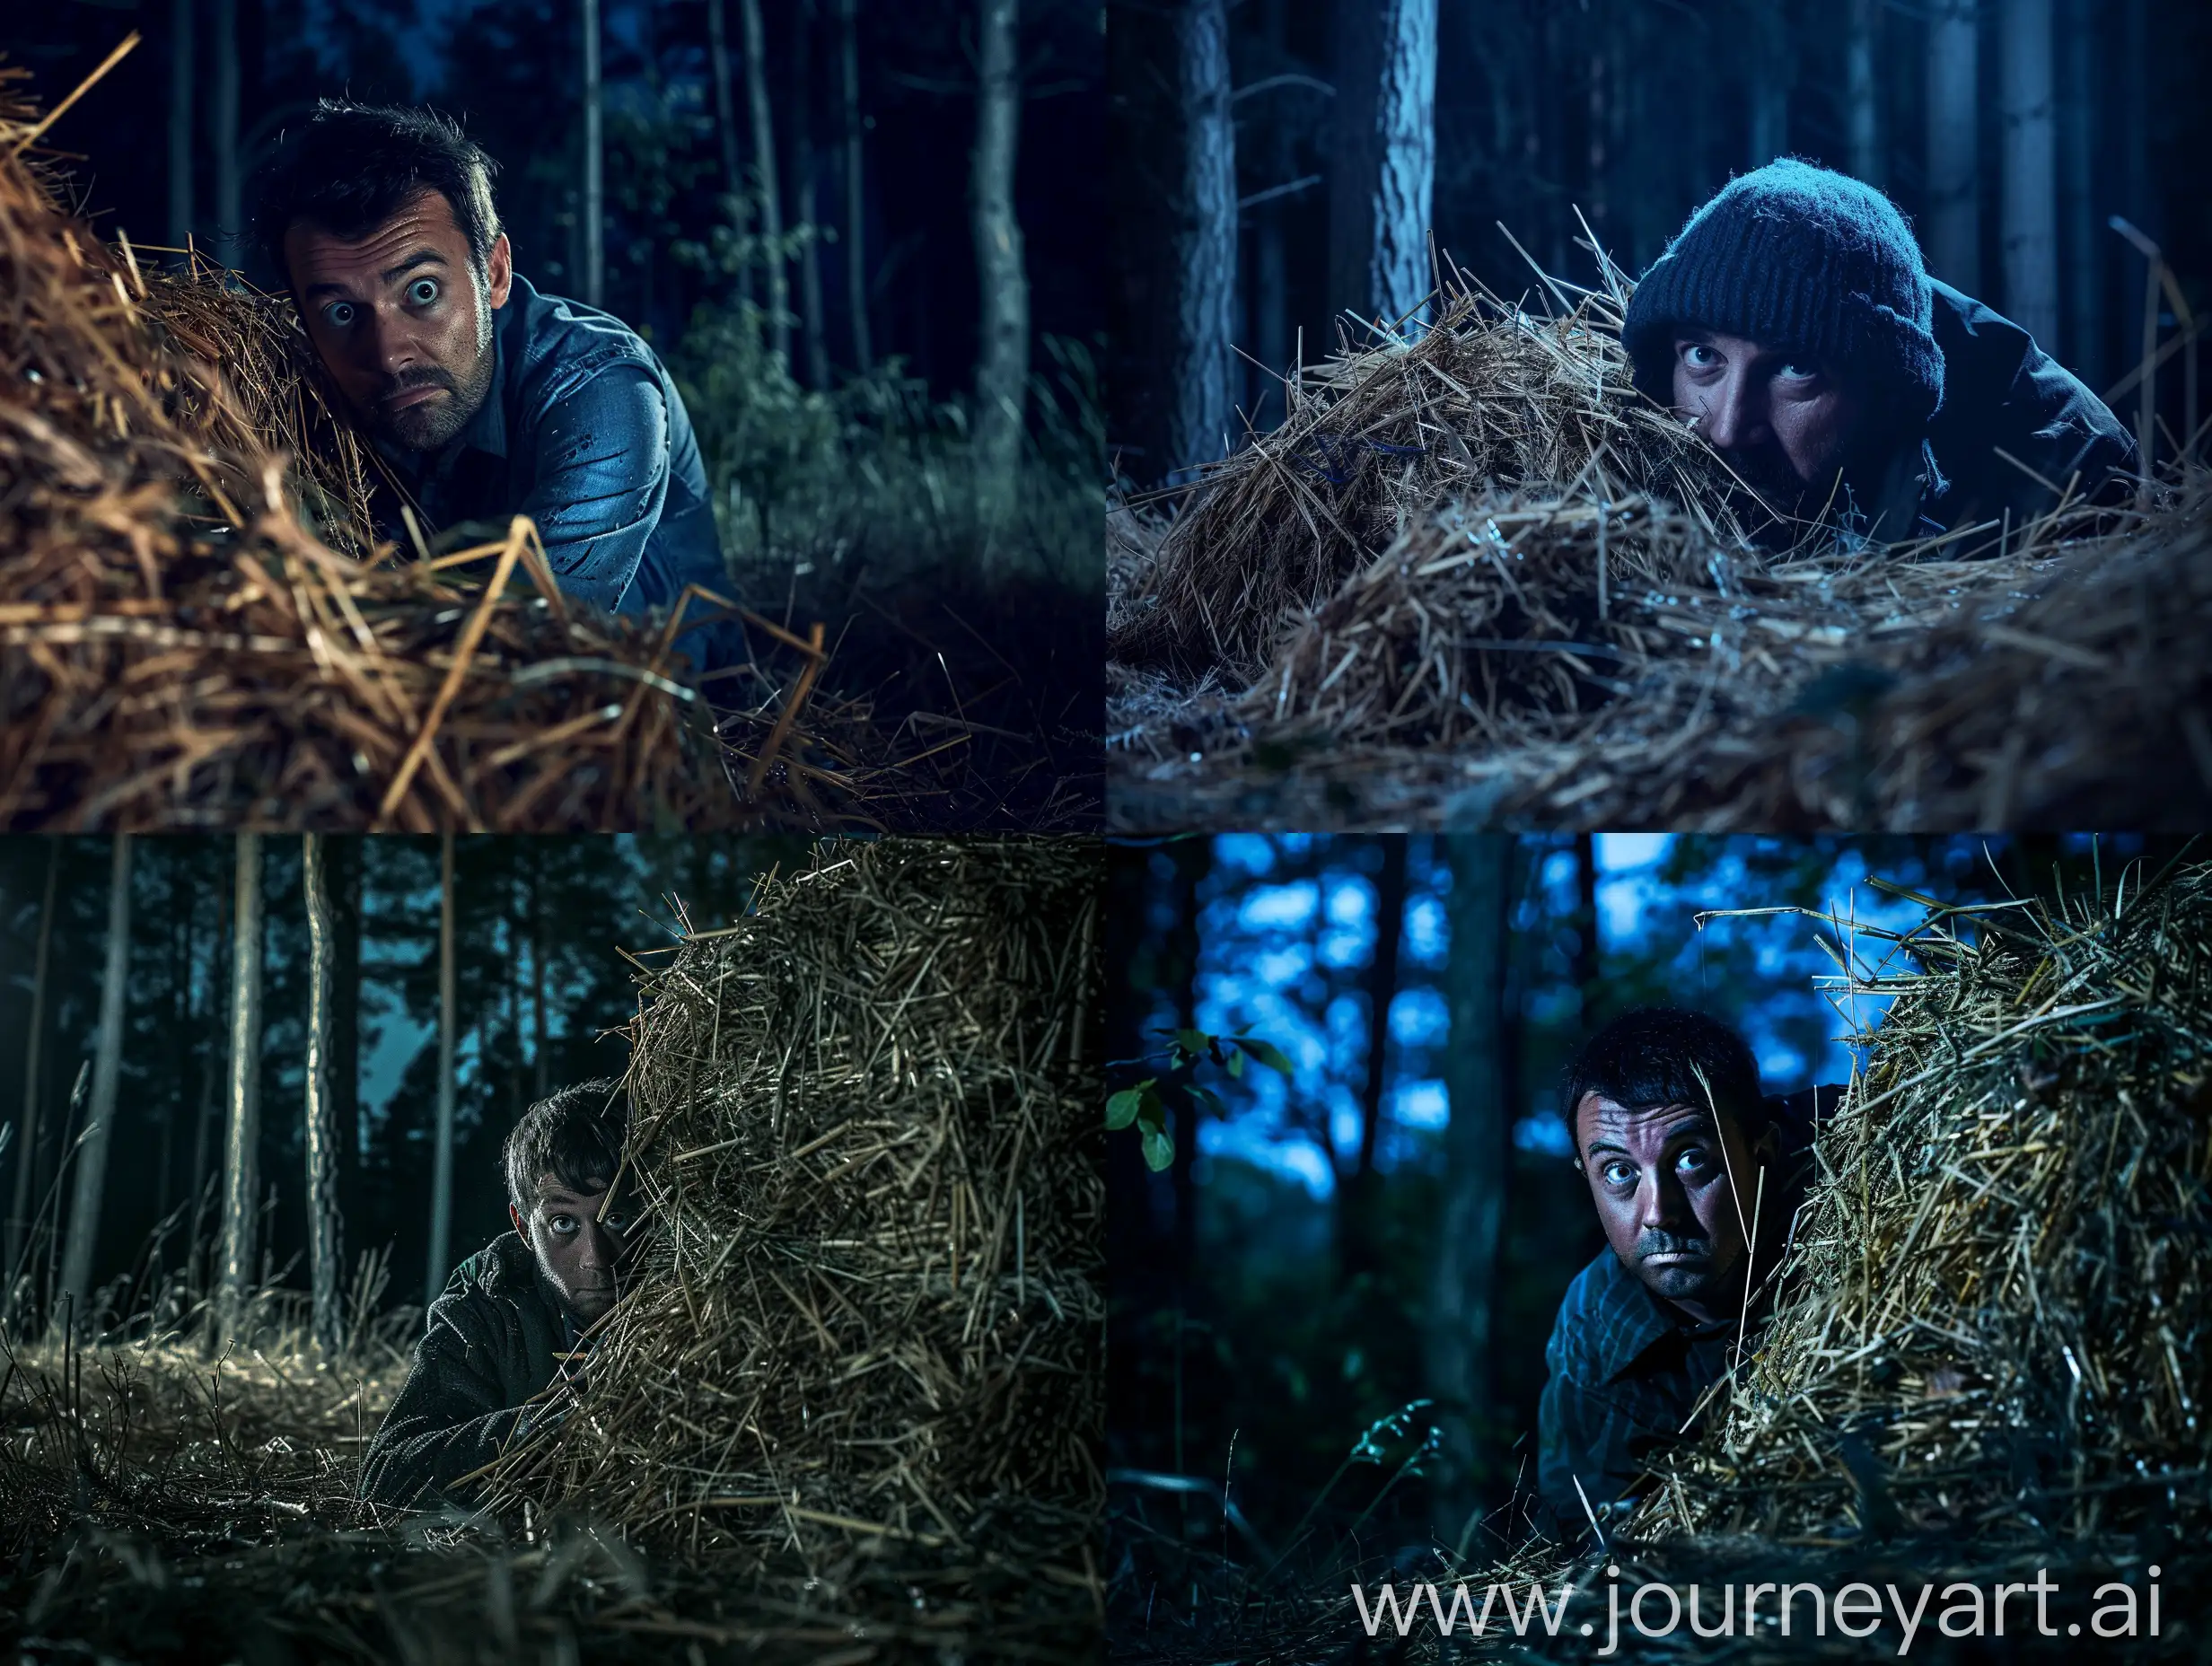 Mysterious-Night-Encounter-Rural-Man-Concealed-Behind-Forest-Haystack